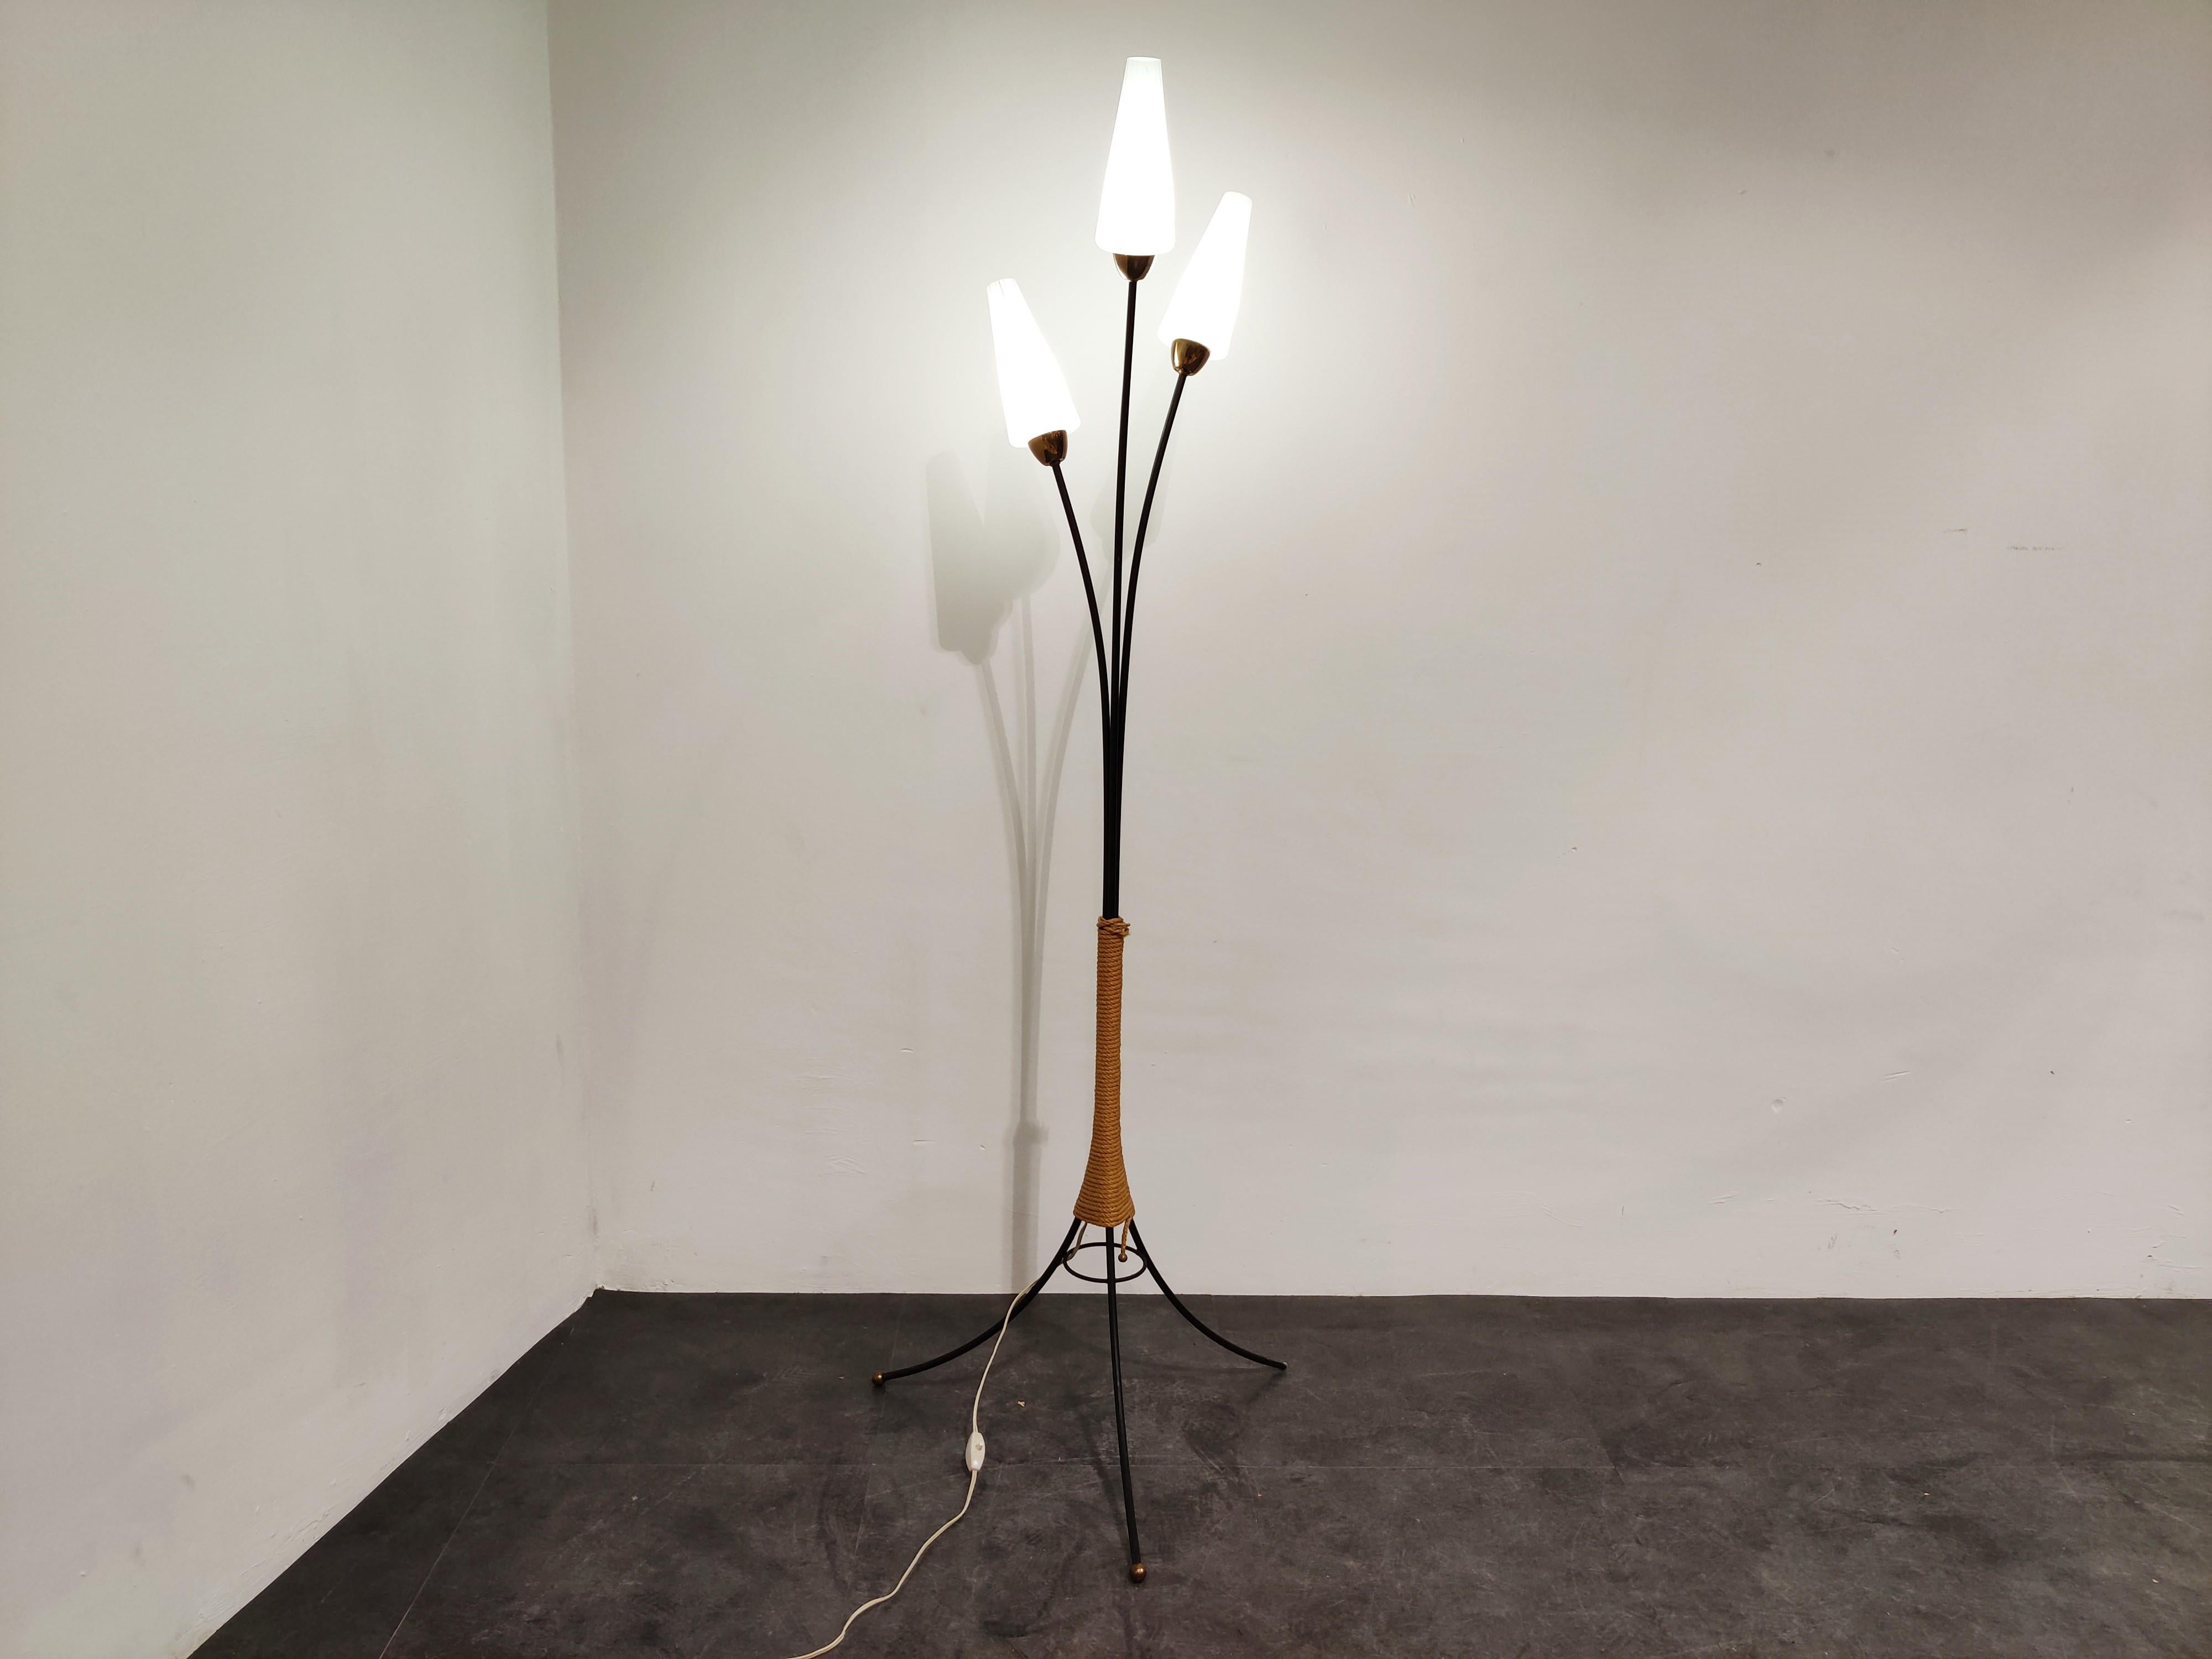 Elegant midcentury floor lamp with metal frame and opaline glasses.

Typical and charming 1950s design.

The lamp has brass shade holders and brass feet and comes with the original 'cord' decoration in the center.

Perfect condition.

Tested